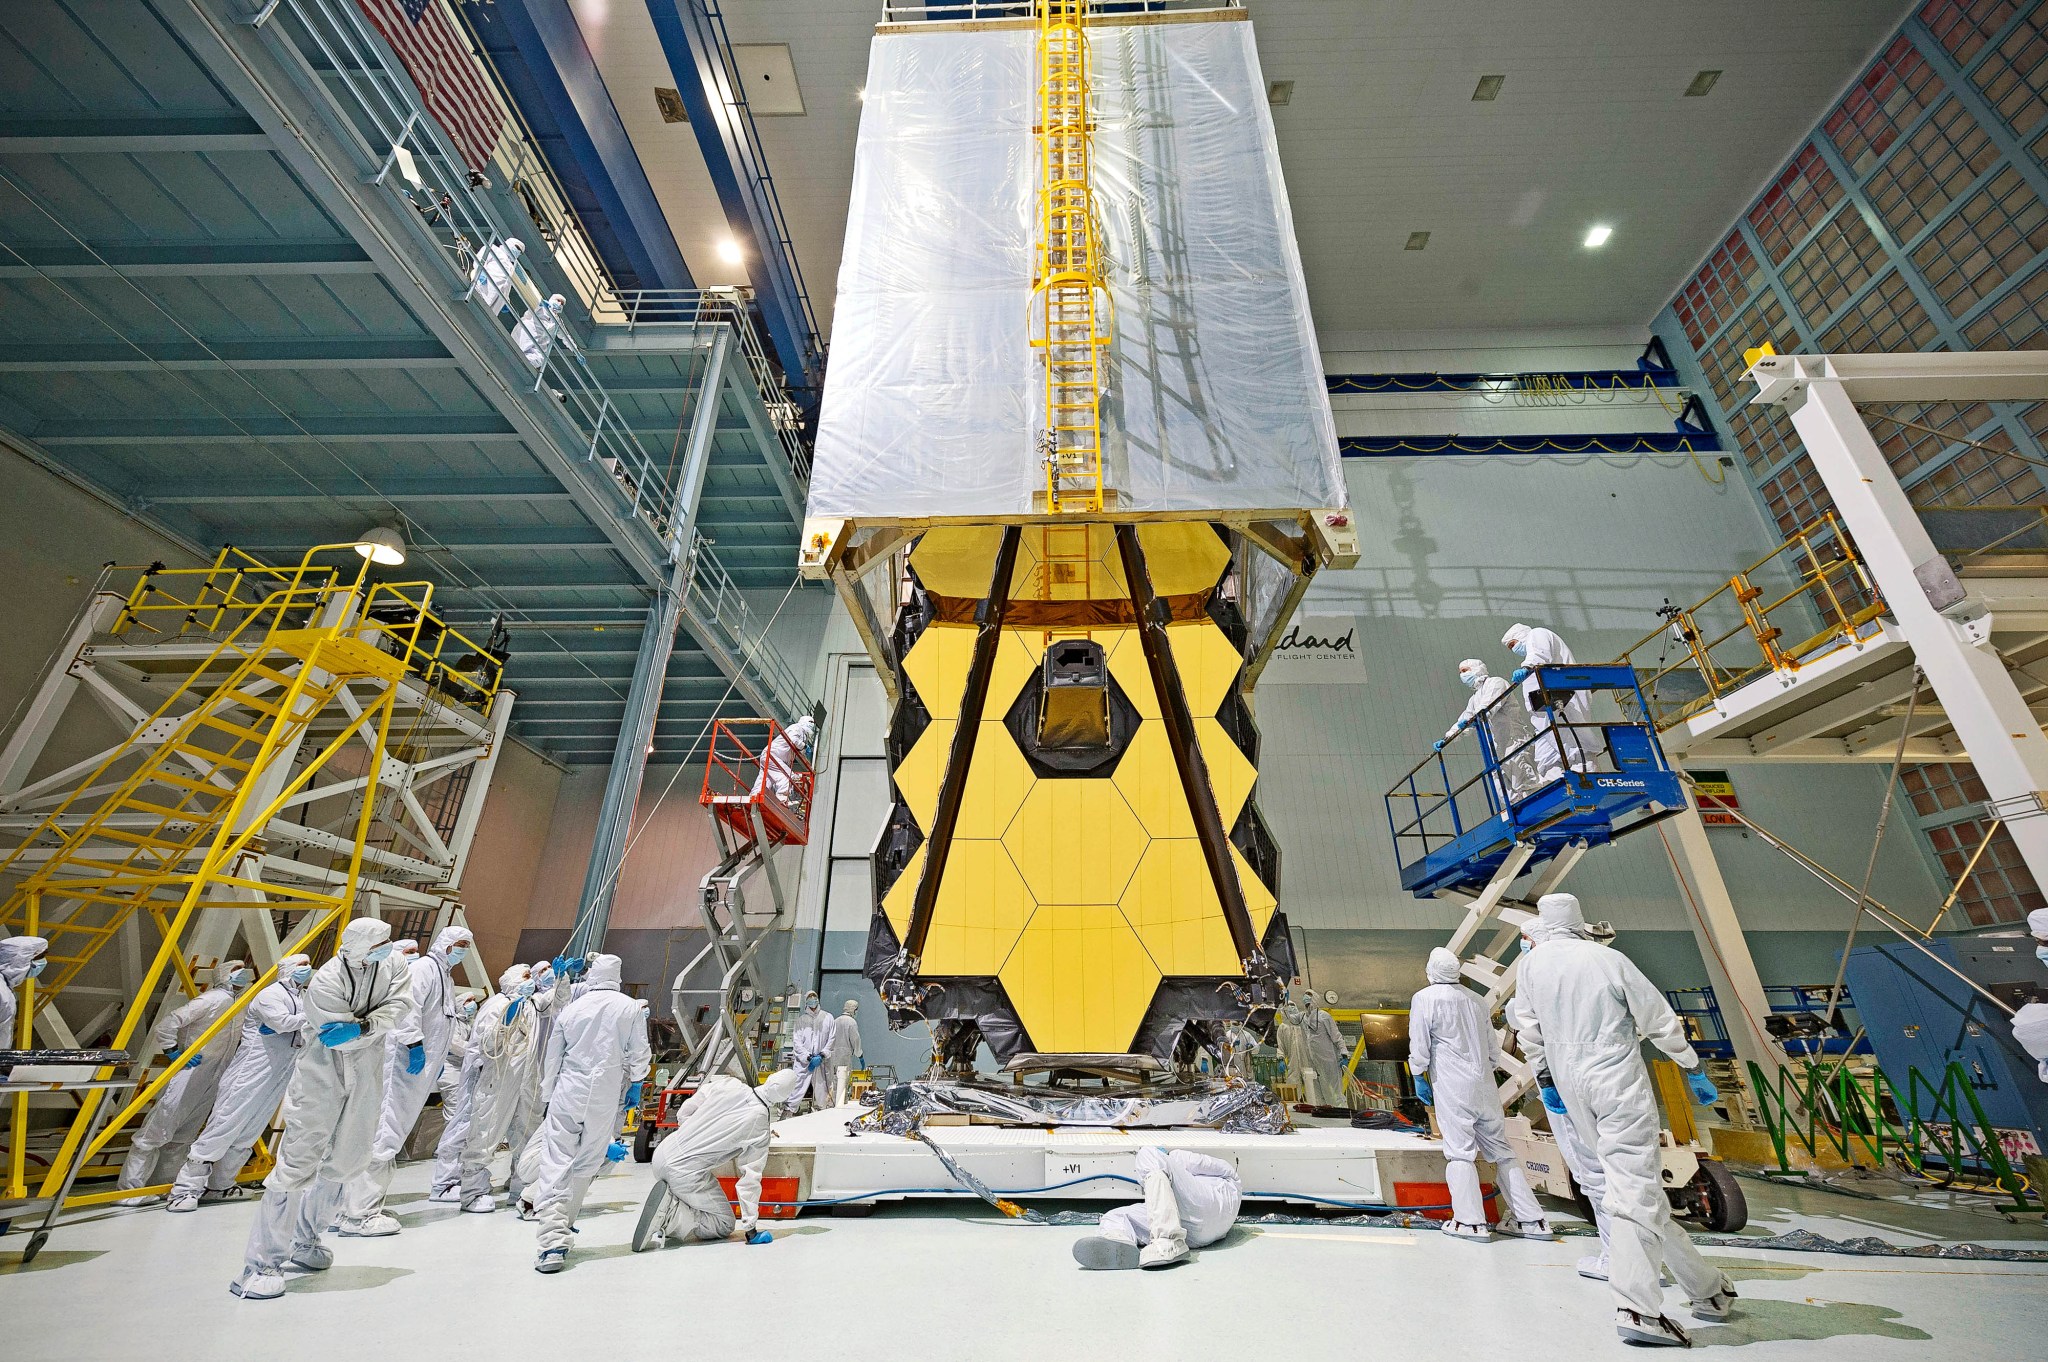 The Webb telescope mirrors are shown in the NASA Goddard cleanroom, with a clean tent, which looks like a giant rectangle made of clear plastic tarp, half over the mirrors. A crane is lowering it down. The mirrors are gold hexagons. The three on each side wing are folded back like a drop leaf table. The telescope is being prepped for vibration testing. For testing, it has to be removed from the cleanroom, so the tent will protect it while it is being tested. There are multiple people in white cleanroom suits that cover them from head to toe and protect the cleanroom from hair and skin cells and contaminants on clothes. Two of the people are on a blue lift to the right of the telescope, and one on a red and silver left to the left, inspecting the work. There is a yellow ladder at far left. There are various white support structures. The wall at far right is covered in HEPA filters. The very large cleanroom door is directly behind the telescope.